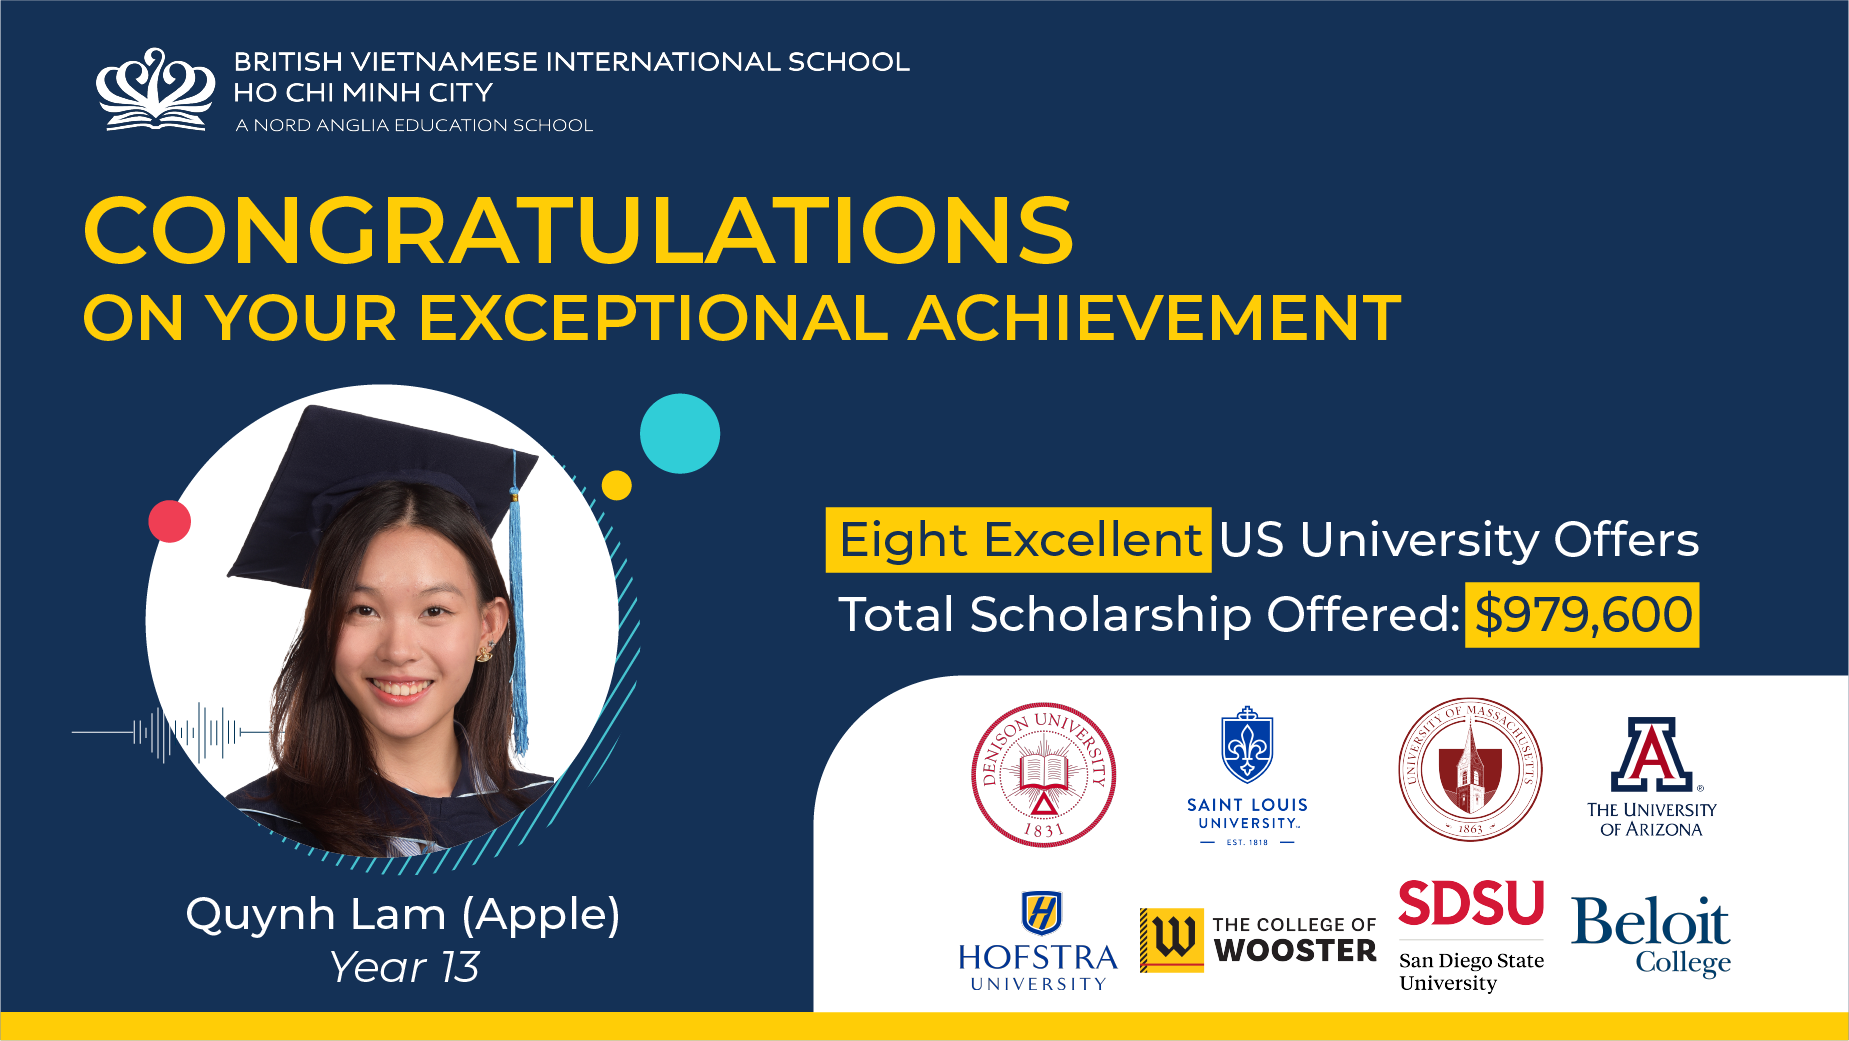 Quynh Lam (Apple), a Year 13 student, has been admitted to 8 US universities with a total scholarship value of 23,5 billion Vietnamese Dong - Quynh Lam Apple Year 13 has been admitted to 8 US universities total scholarship 23 5 billion Dong